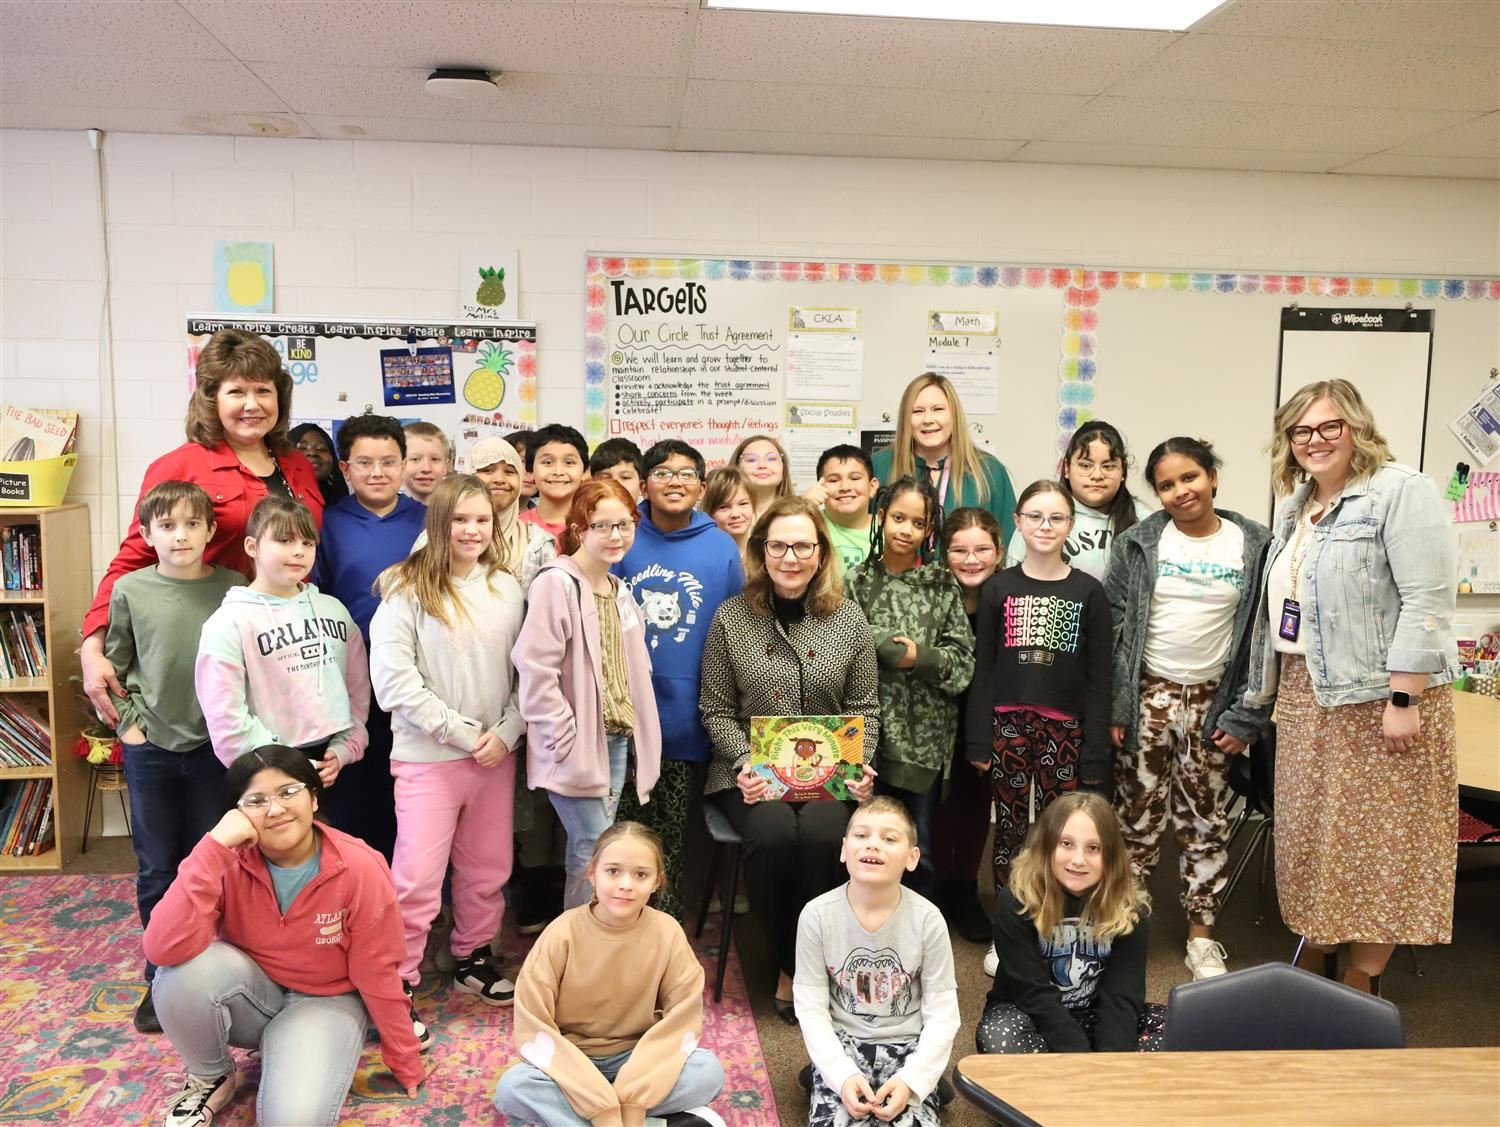 Nebraska First Lady, Suzanne Pillen, smiling with Seedling Mile Elementary 4th Graders and Teachers.